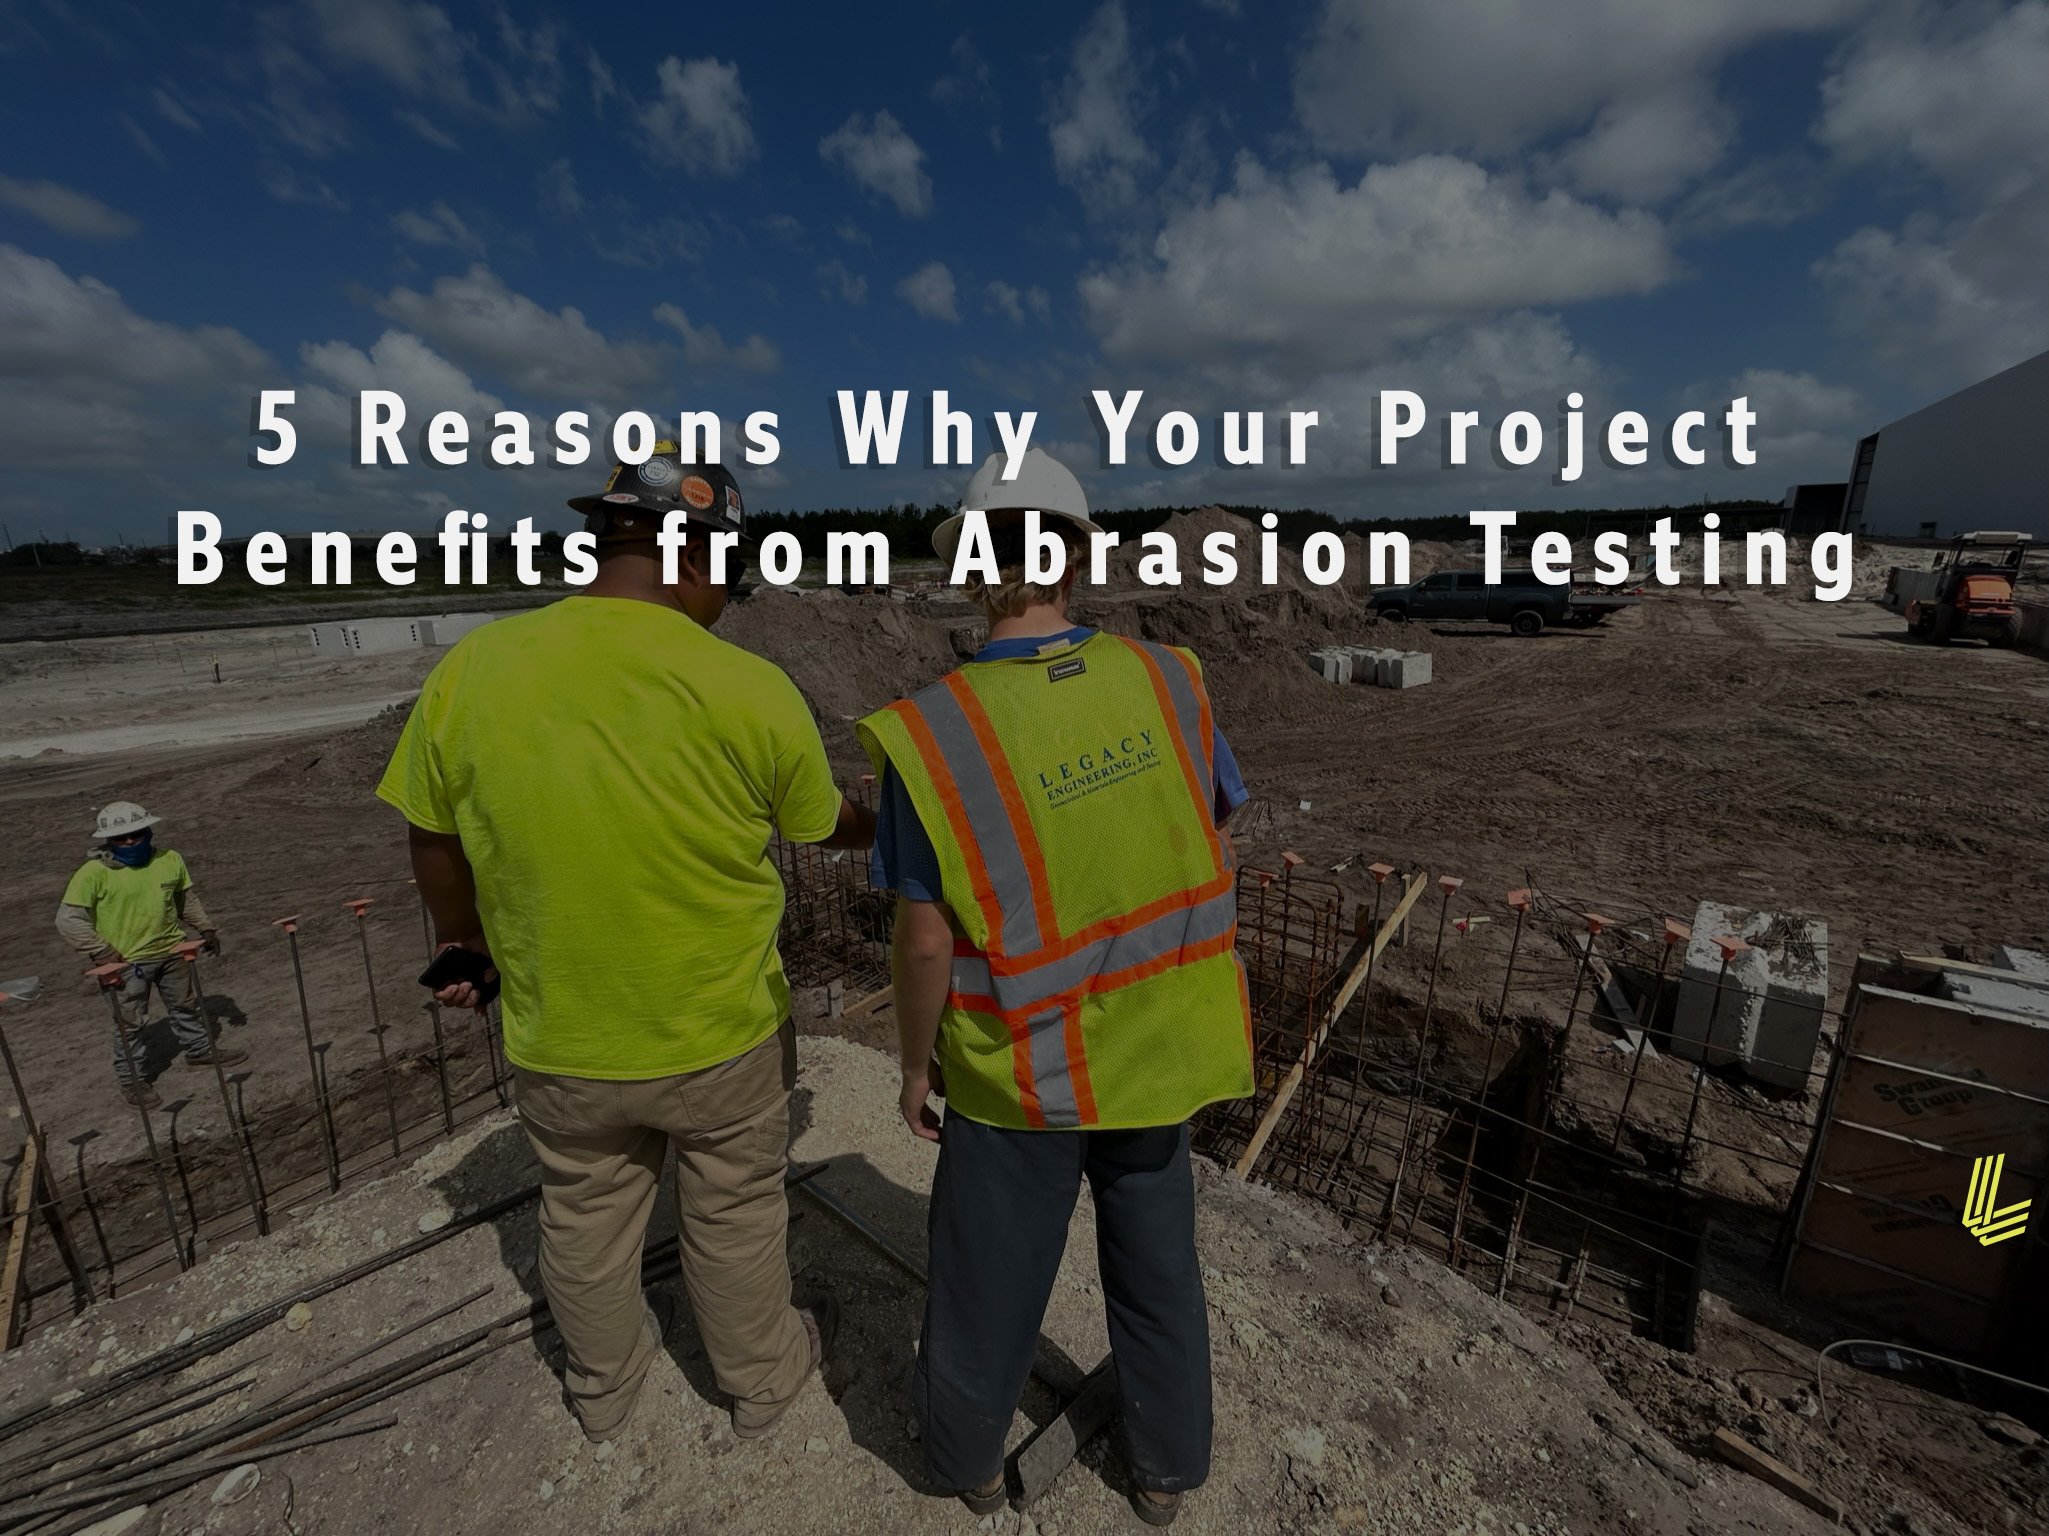 graphic for 5 reasons abrasion testing is important